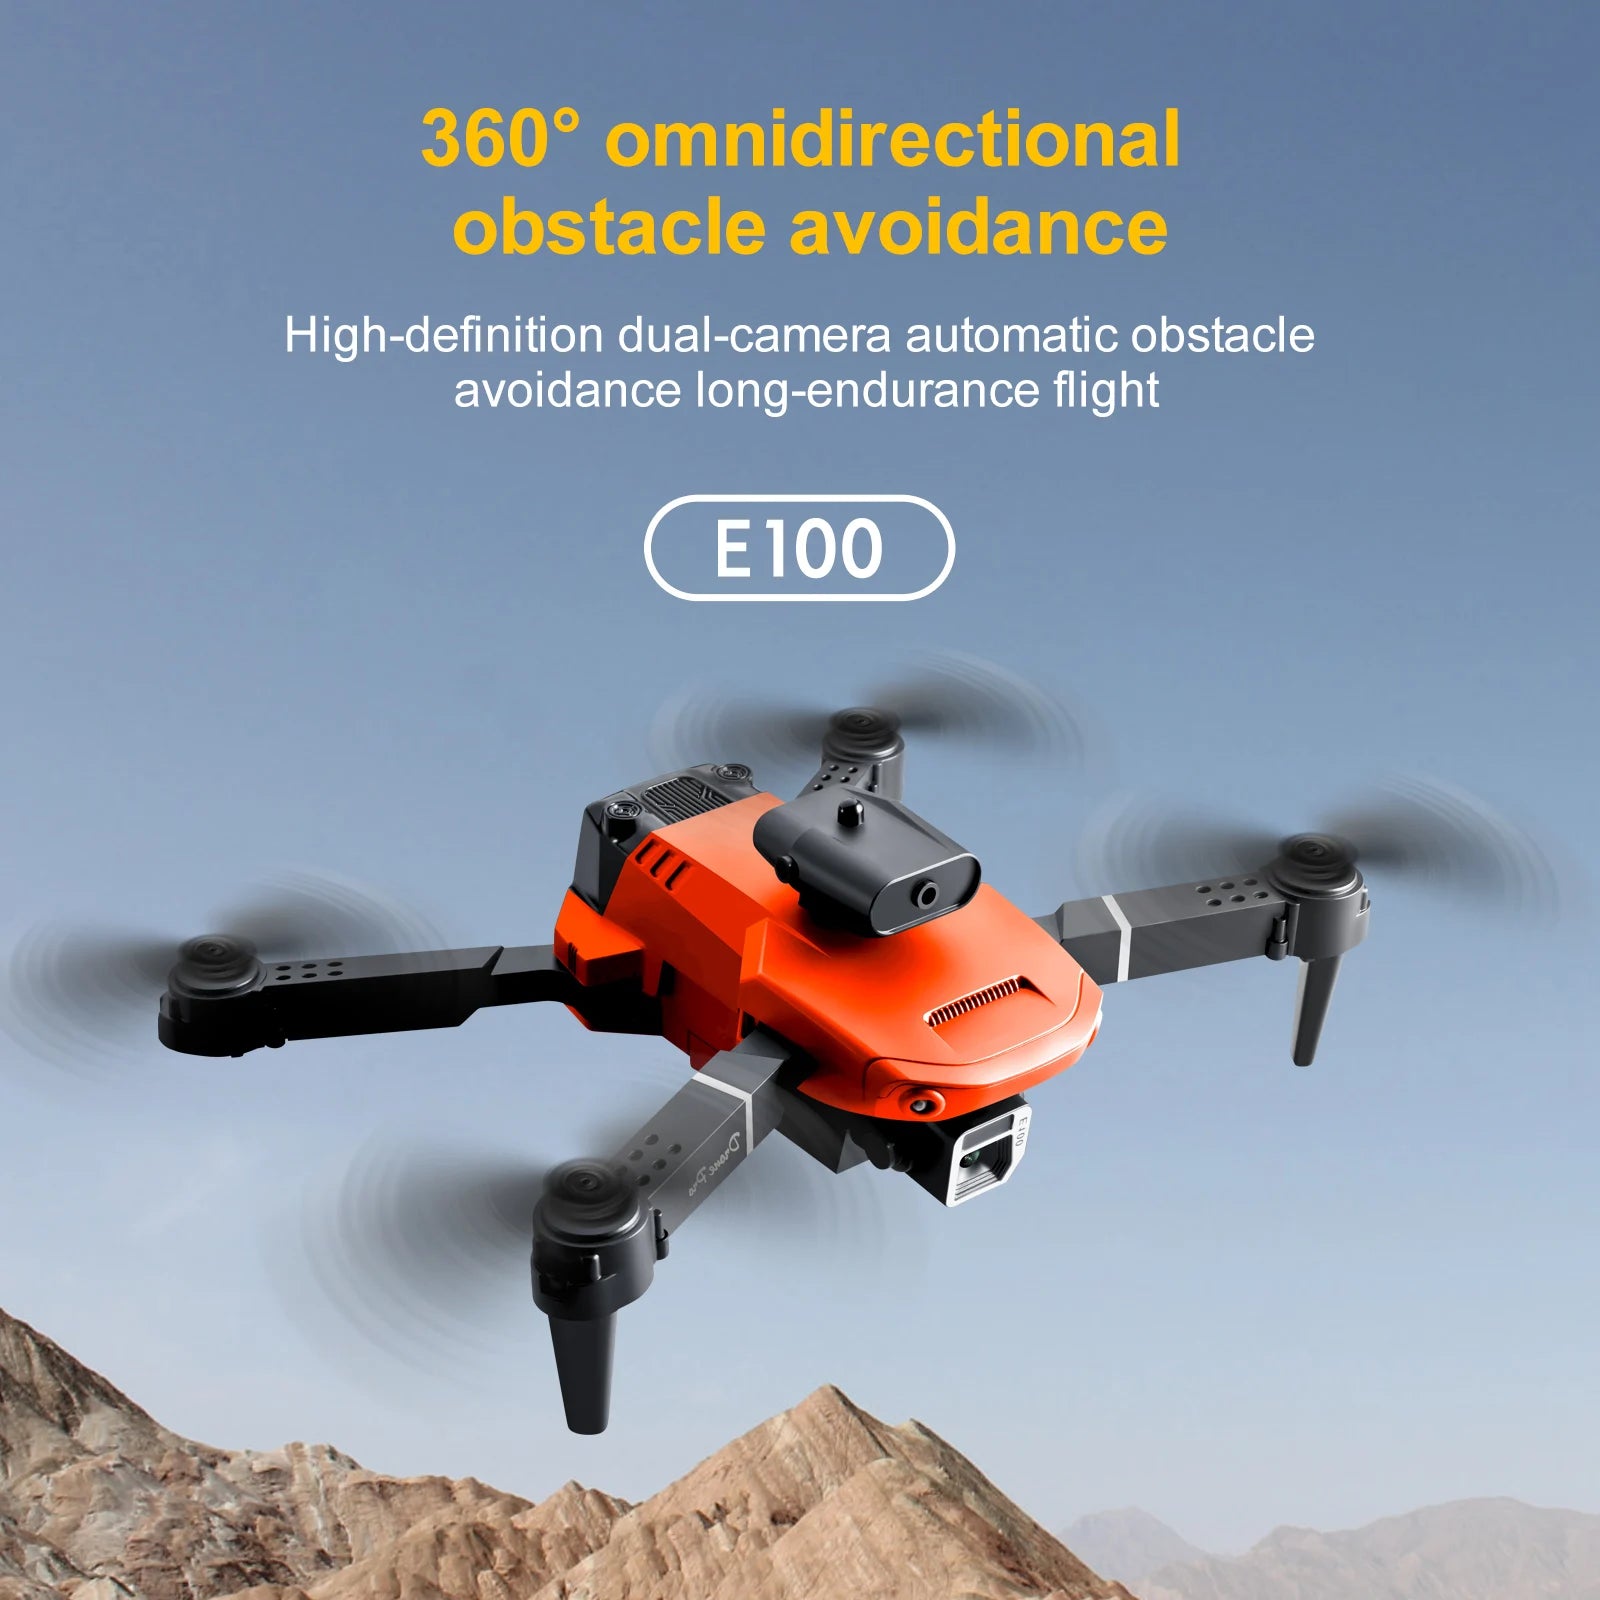 E100 Drone - 4K Dual HD Camera, E100 Drone, 3600 omnidirectional obstacle avoidance high-definition dual